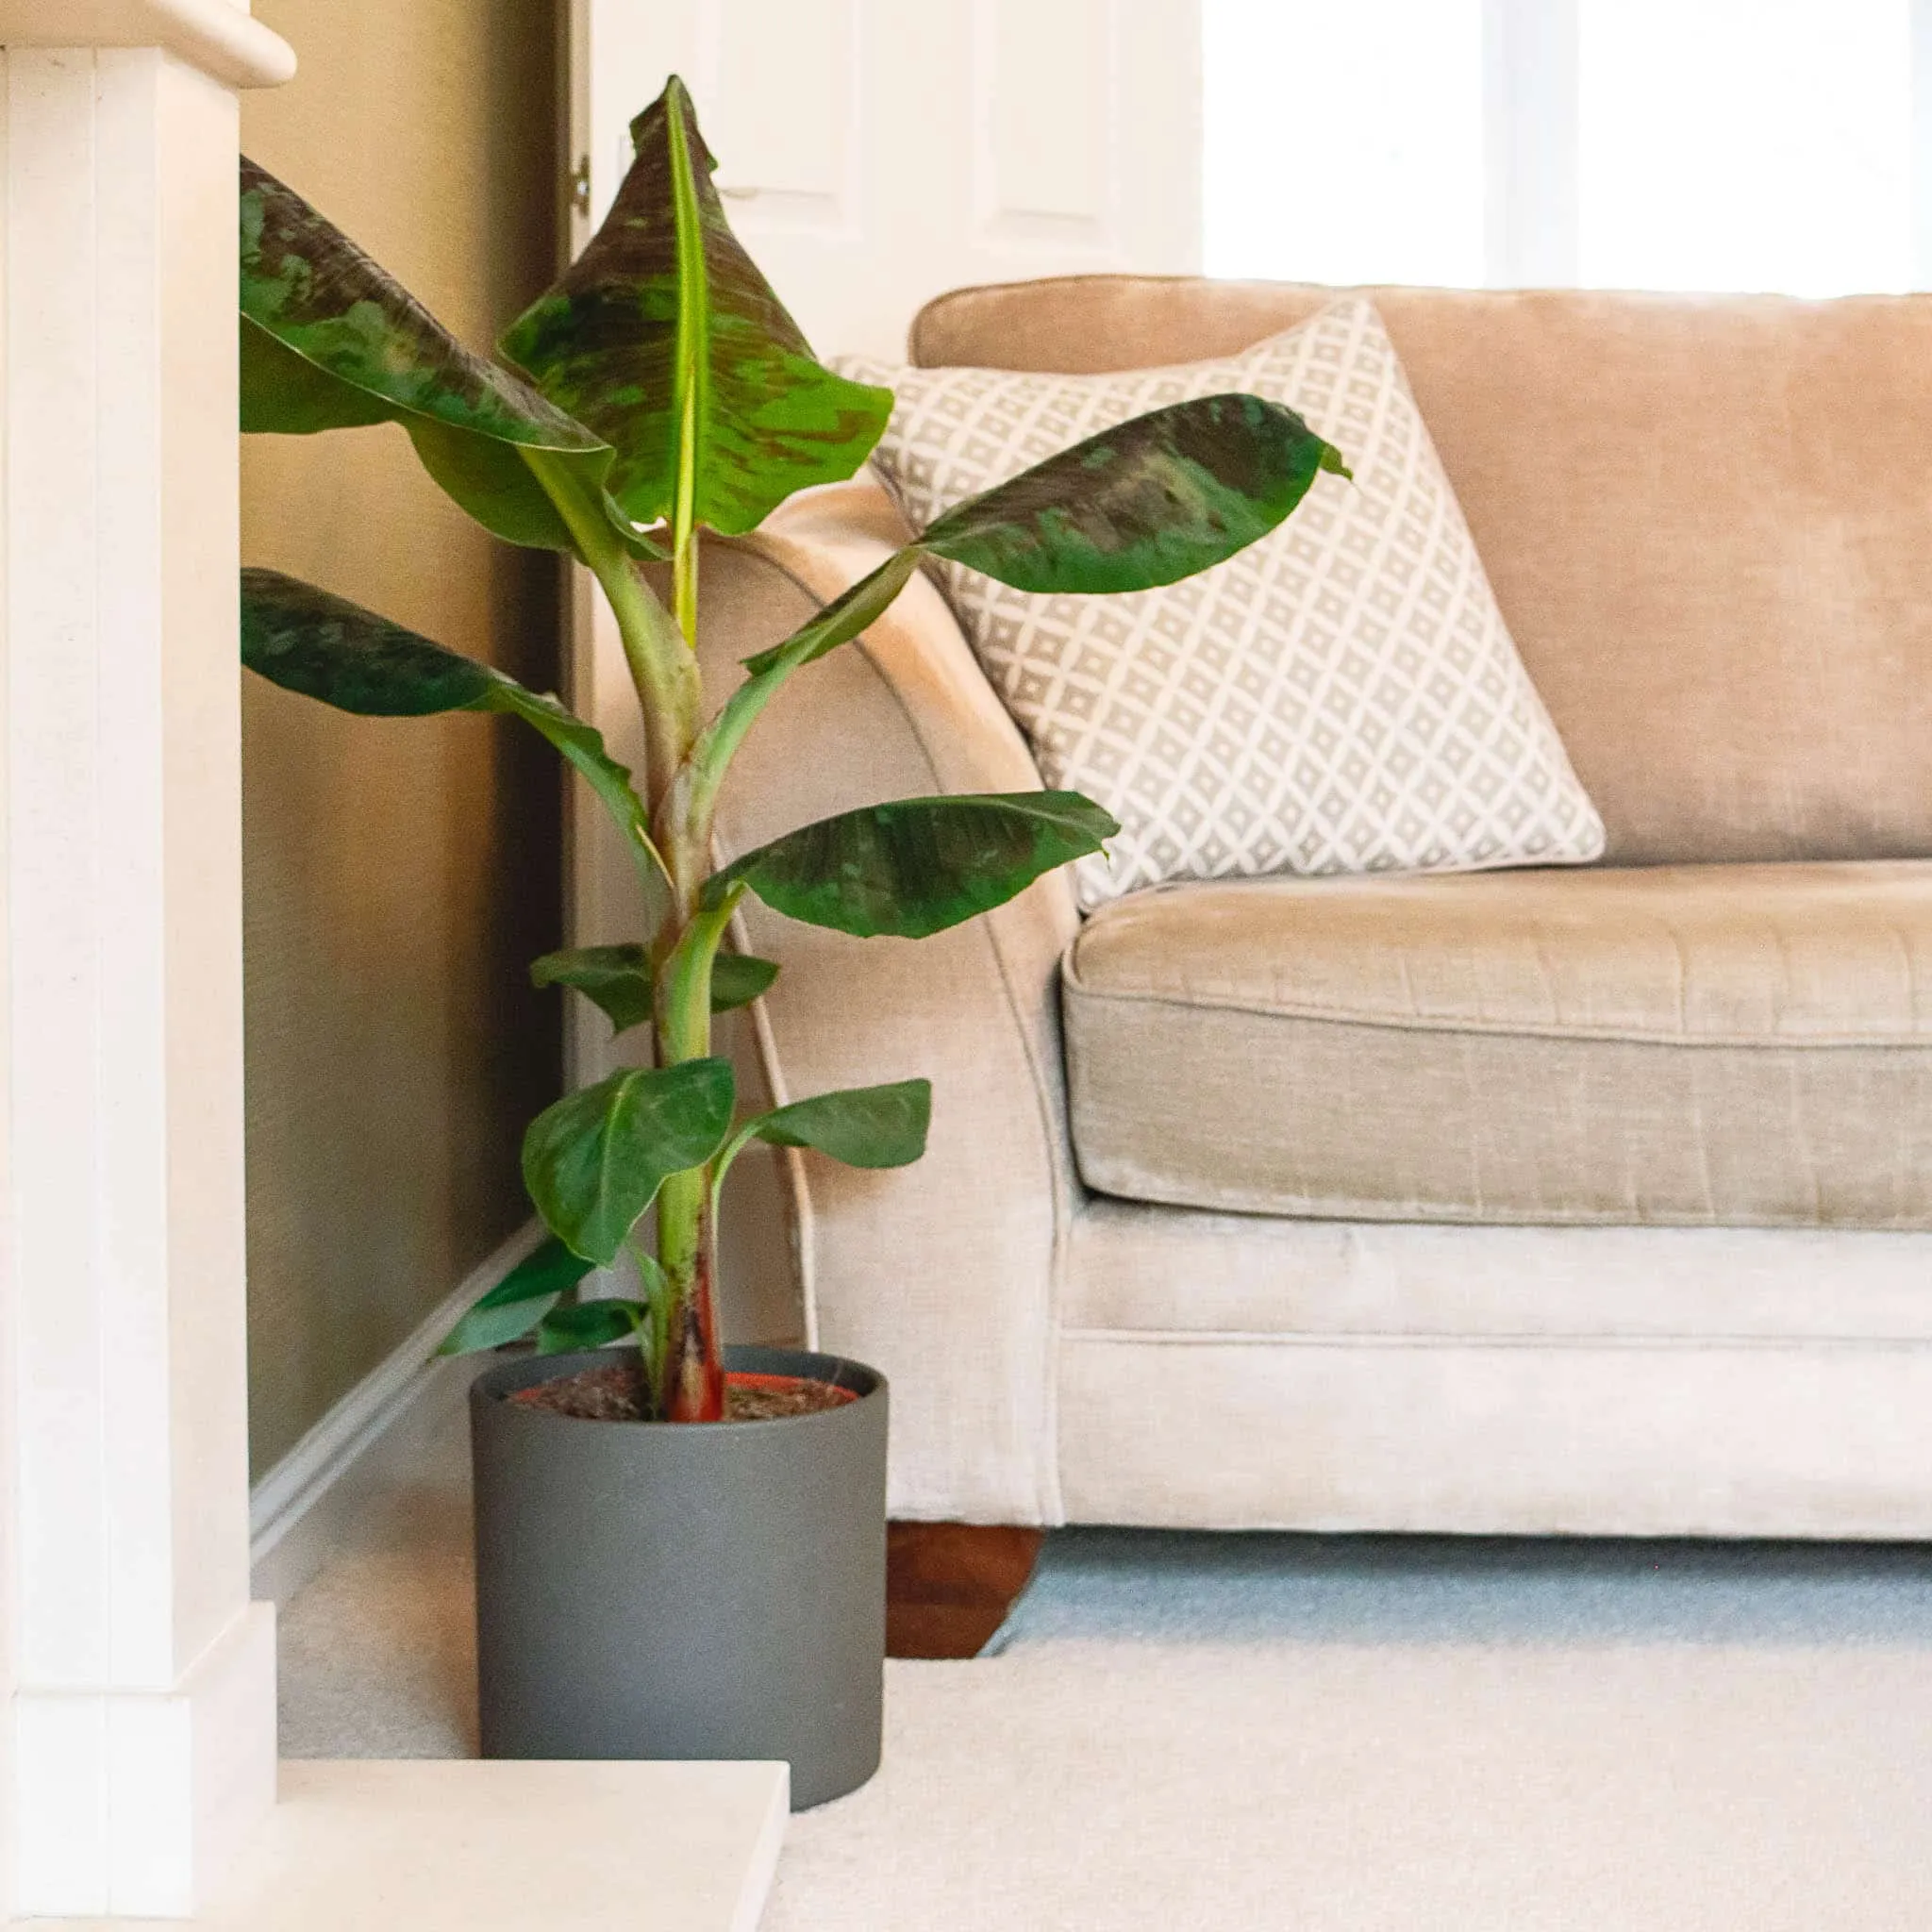 white and off white sofa with a cushion, green banana plant in a grey pot with soil